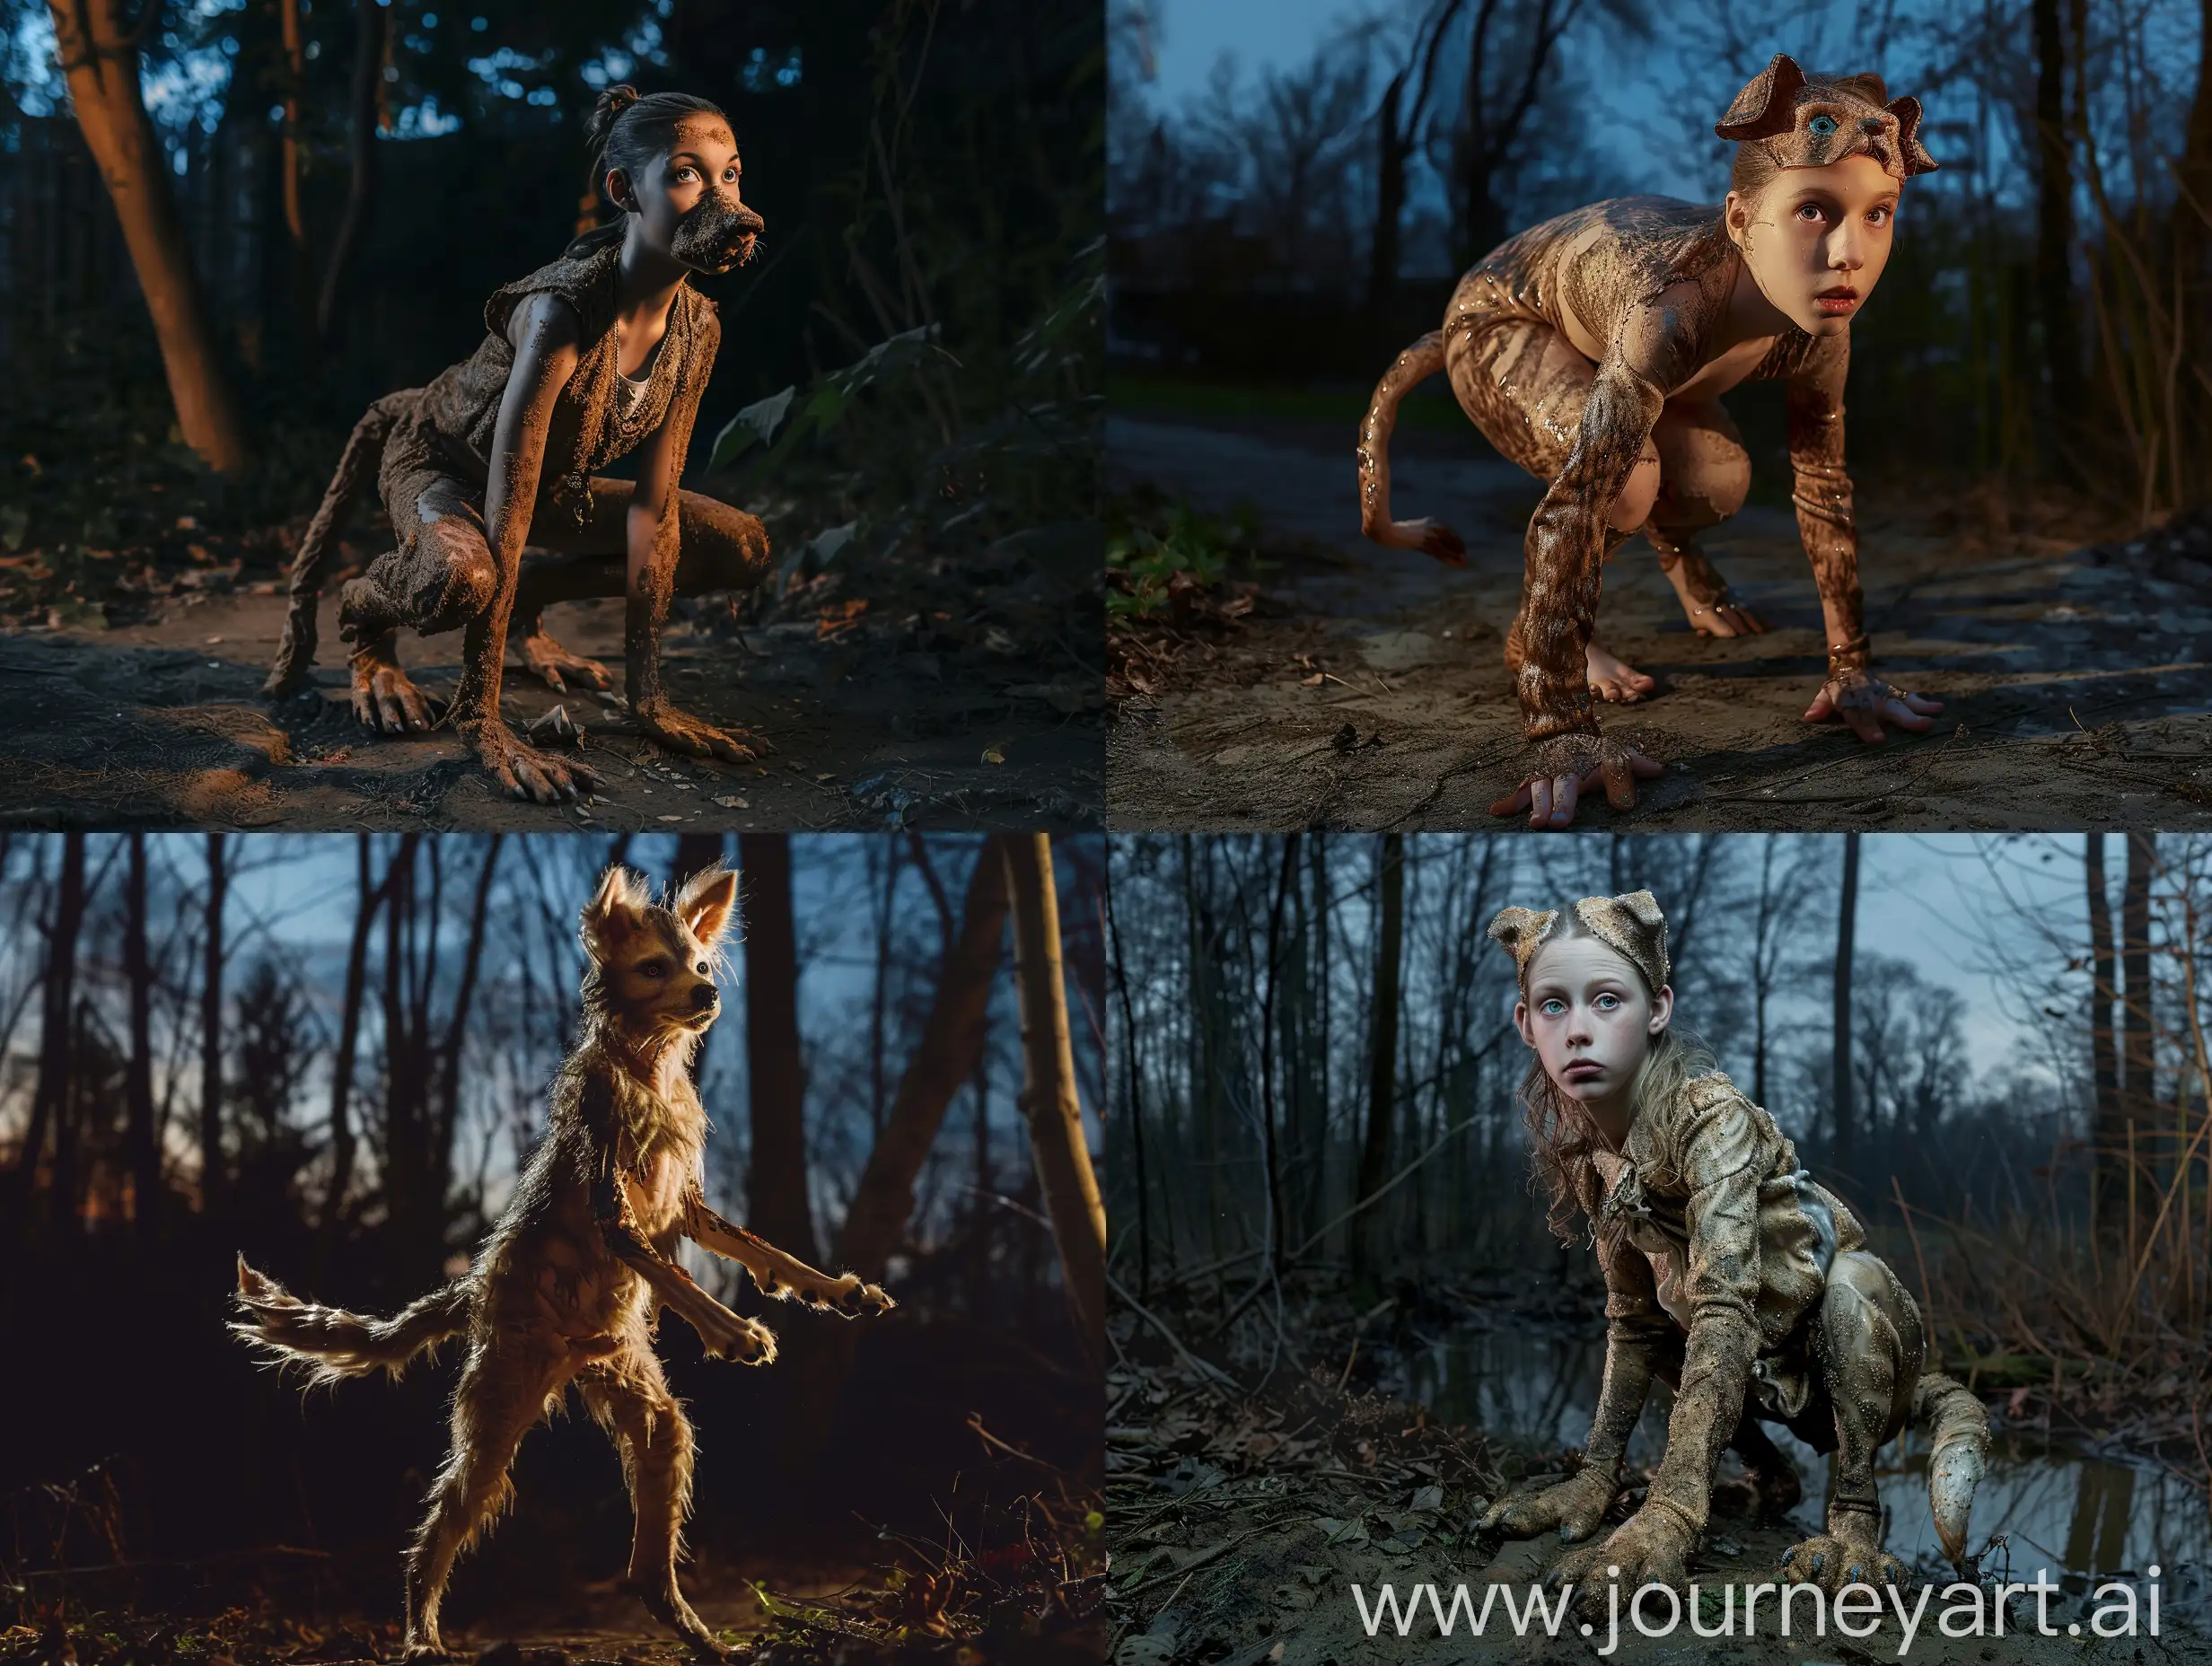 A young woman who has been transformed into a dog. She has a paws, a tail, and a snout. She is standing on all fours in a forest at night. Realistic photograph, full body picture